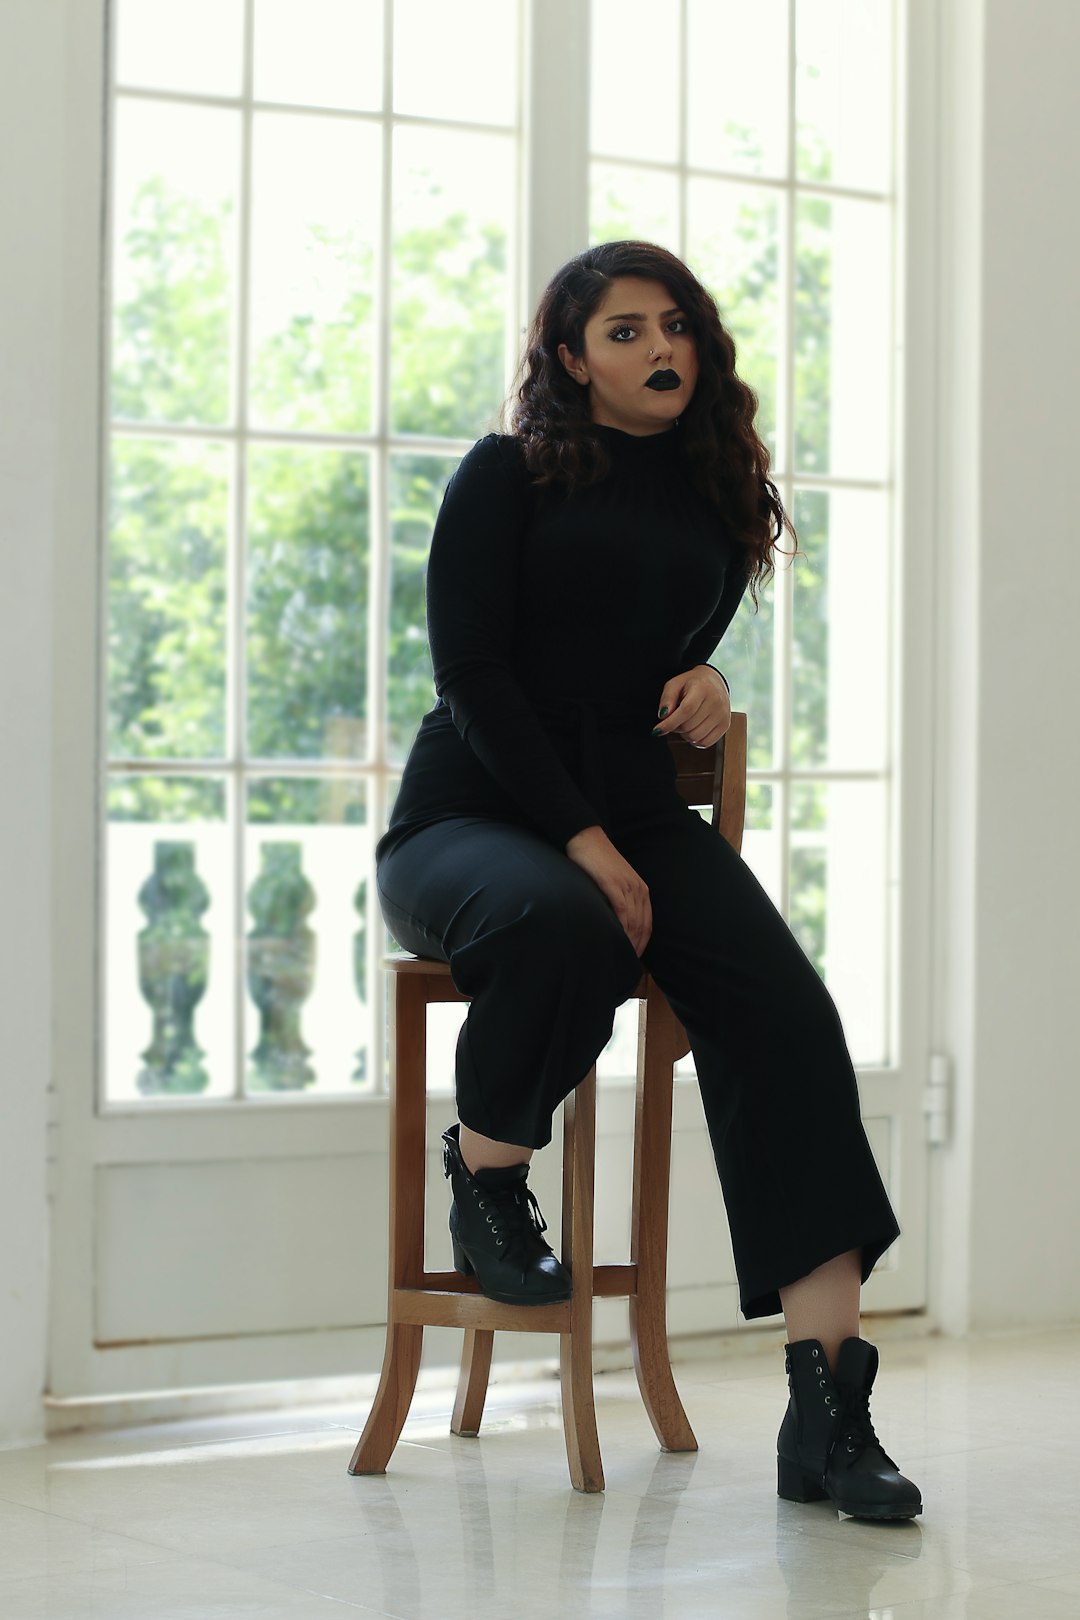 woman in black long sleeve shirt and black pants sitting on brown wooden chair